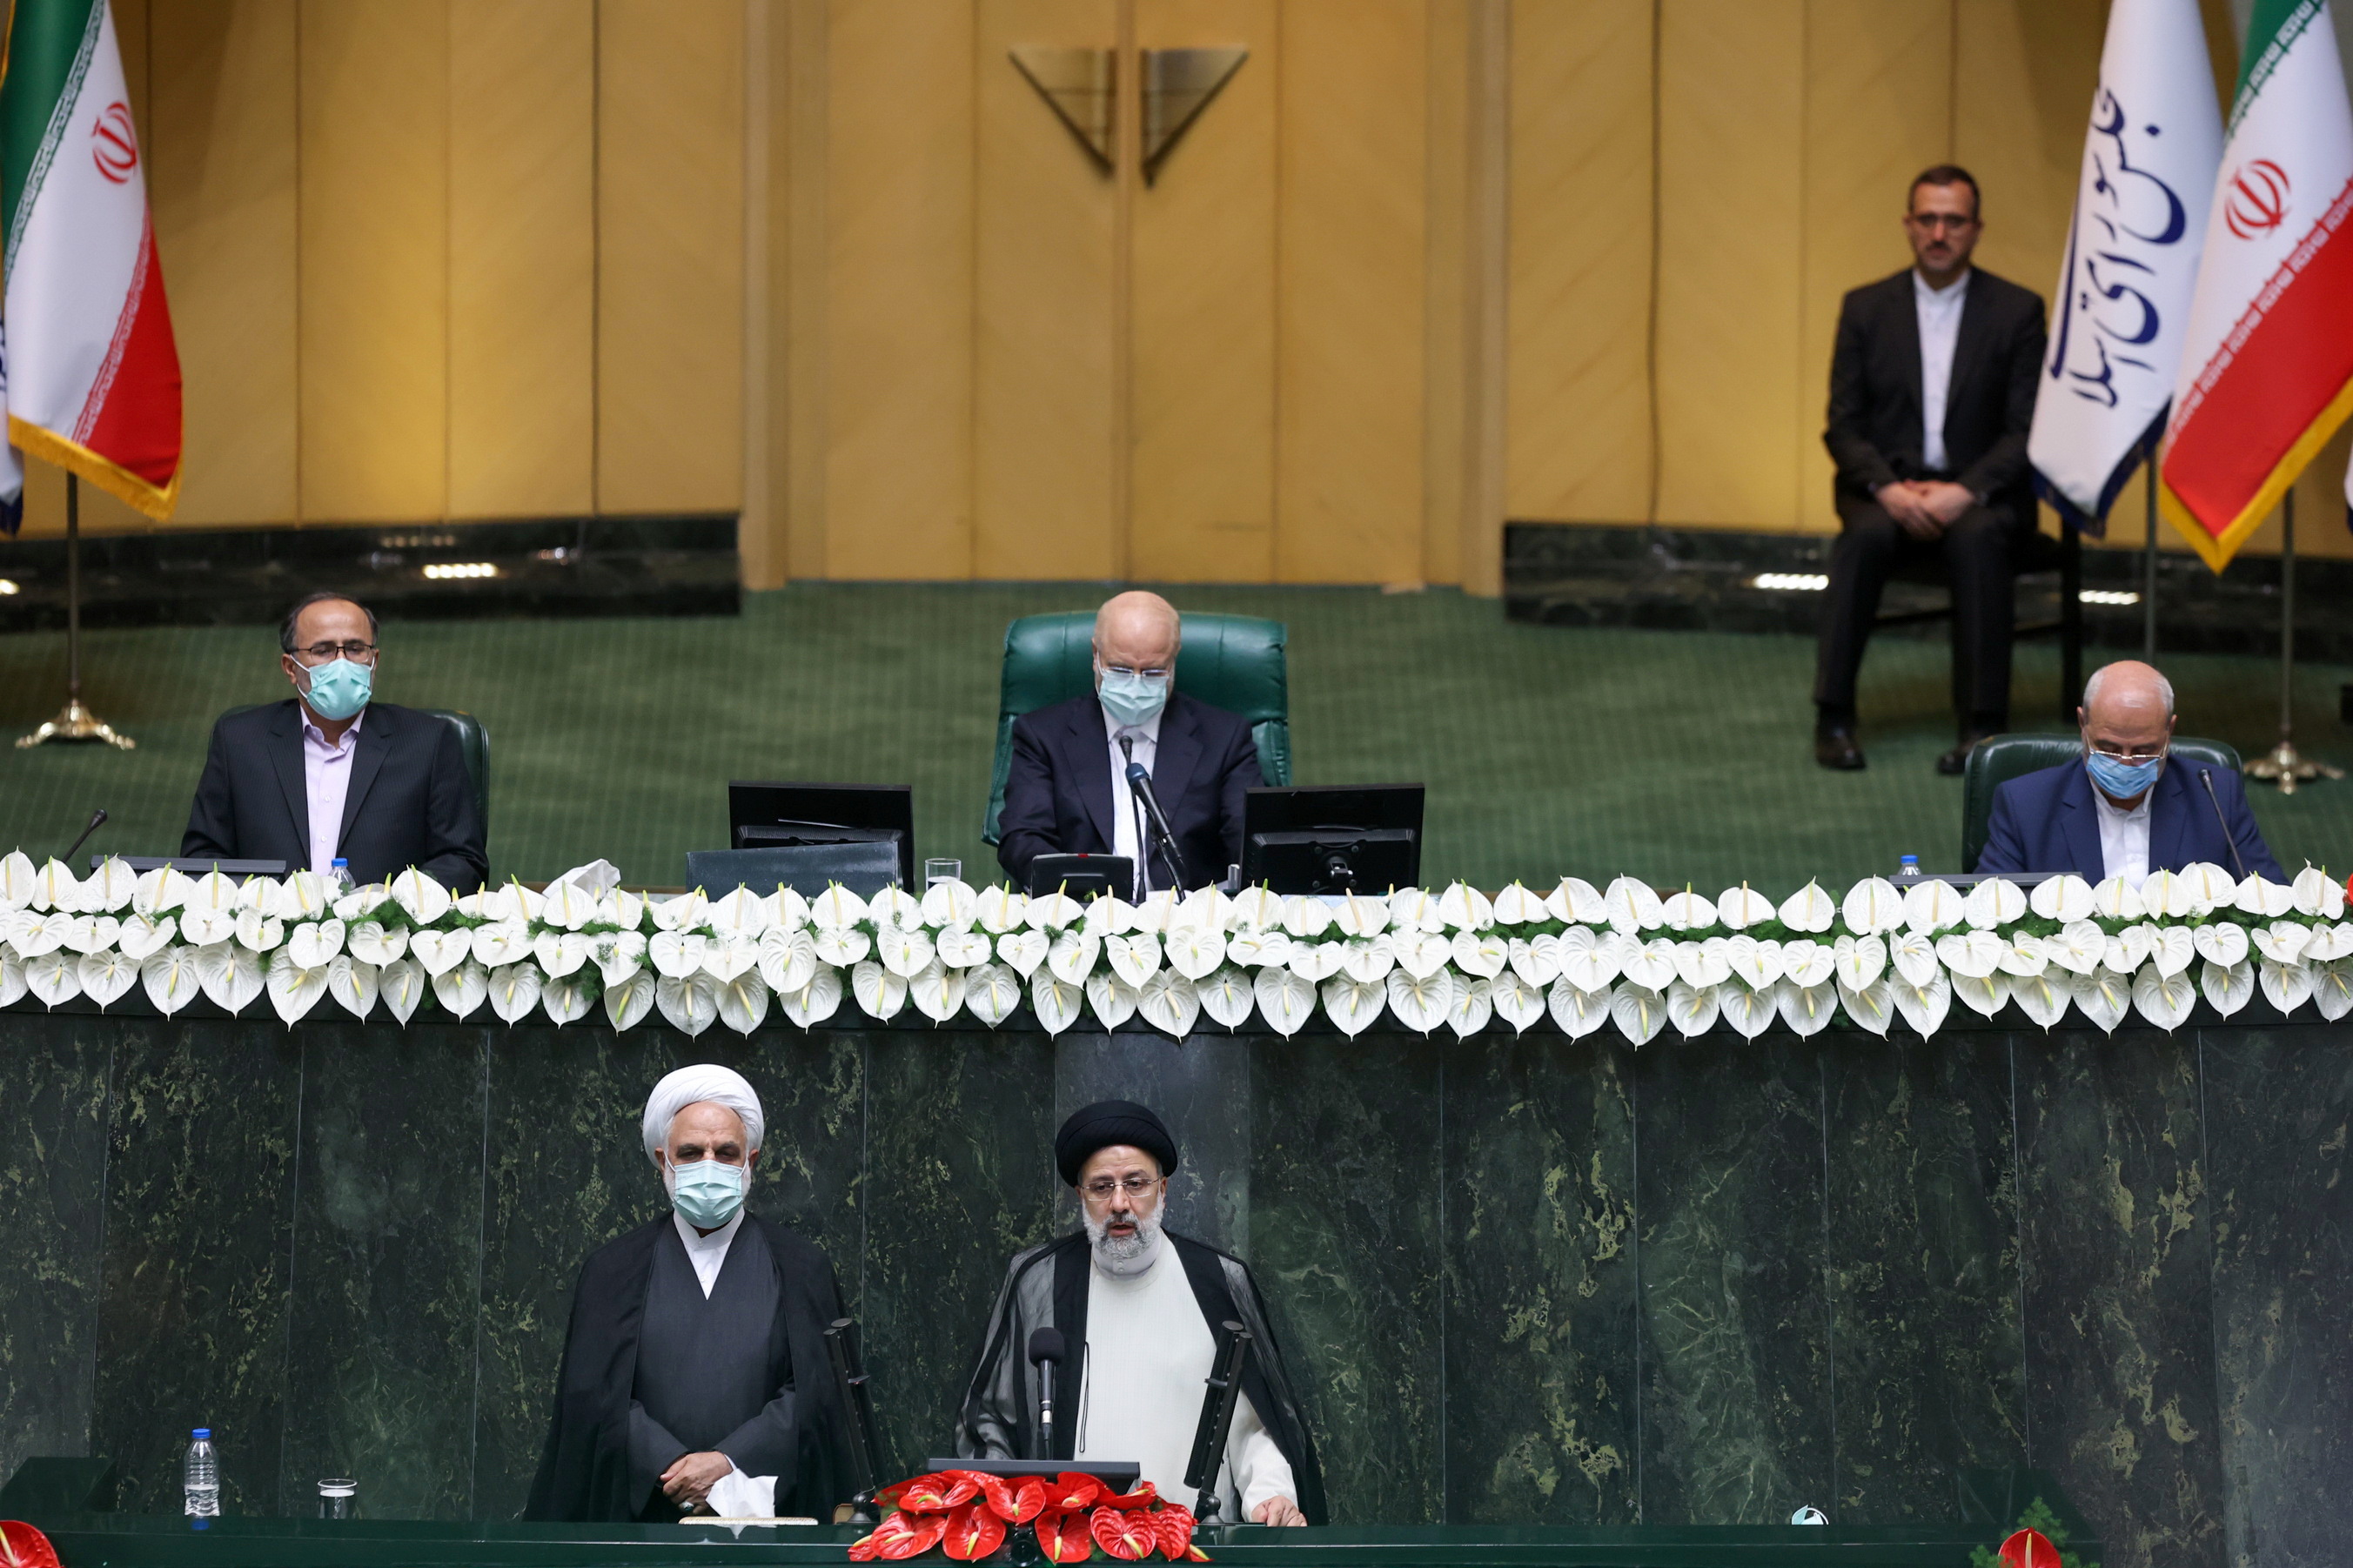 Iran's new President Ebrahim Raisi takes the oath during his swearing-in ceremony at the parliament in Tehran